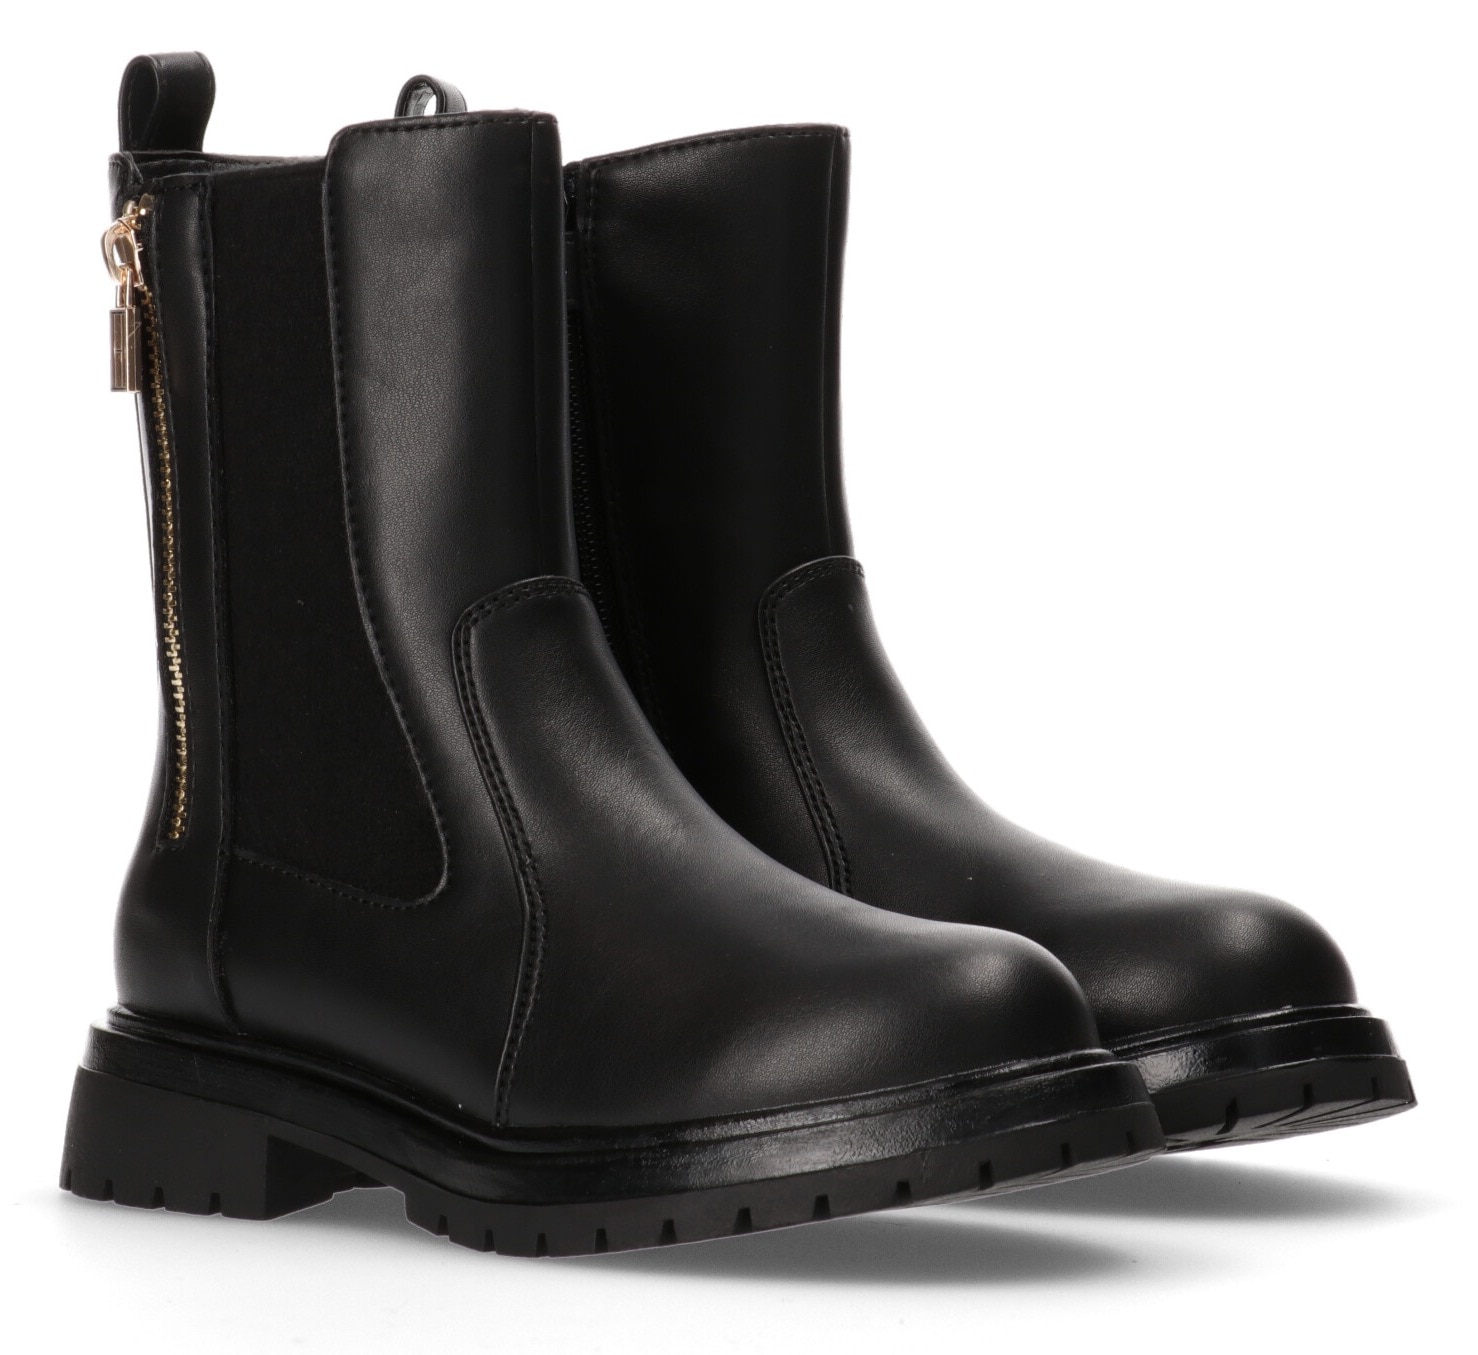 TOMMY HILFIGER Chelseaboots »CHELSEA BOOT« su Innenre...